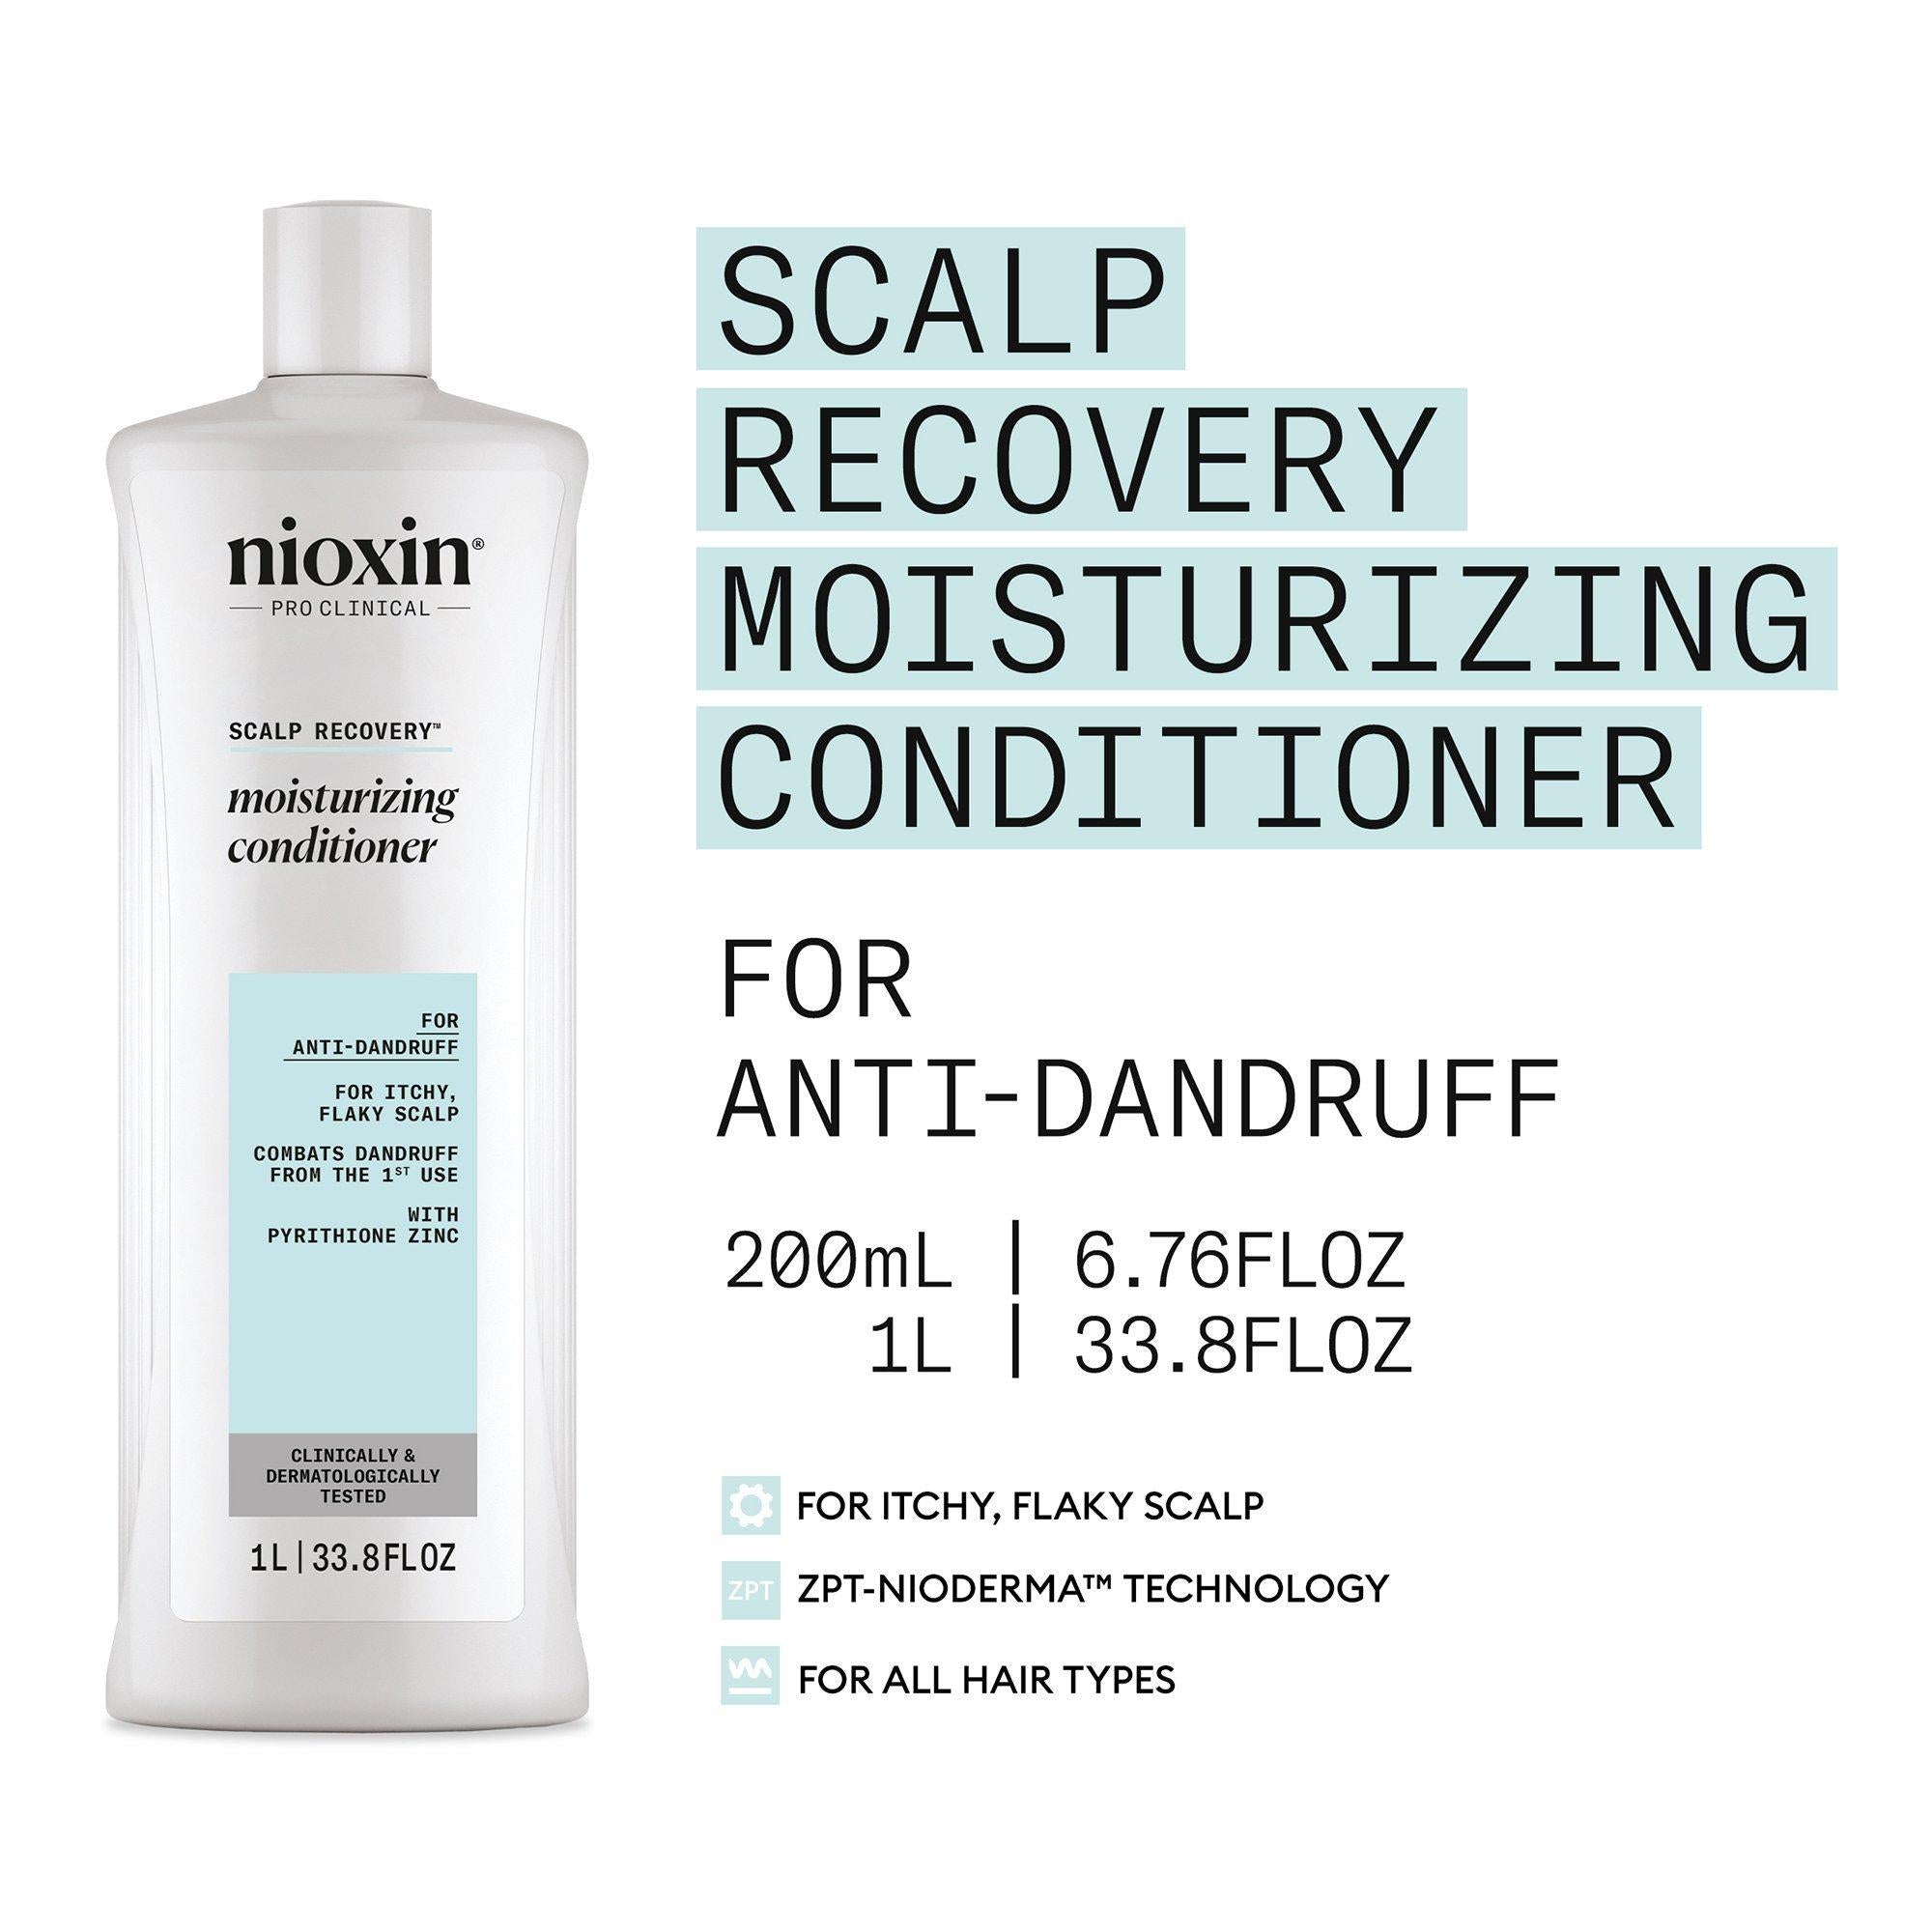 Nioxin Scalp Recovery Purifying Shampoo and Moisturizing Conditioner Liter Duo ($120 Value) / 33.8OZ